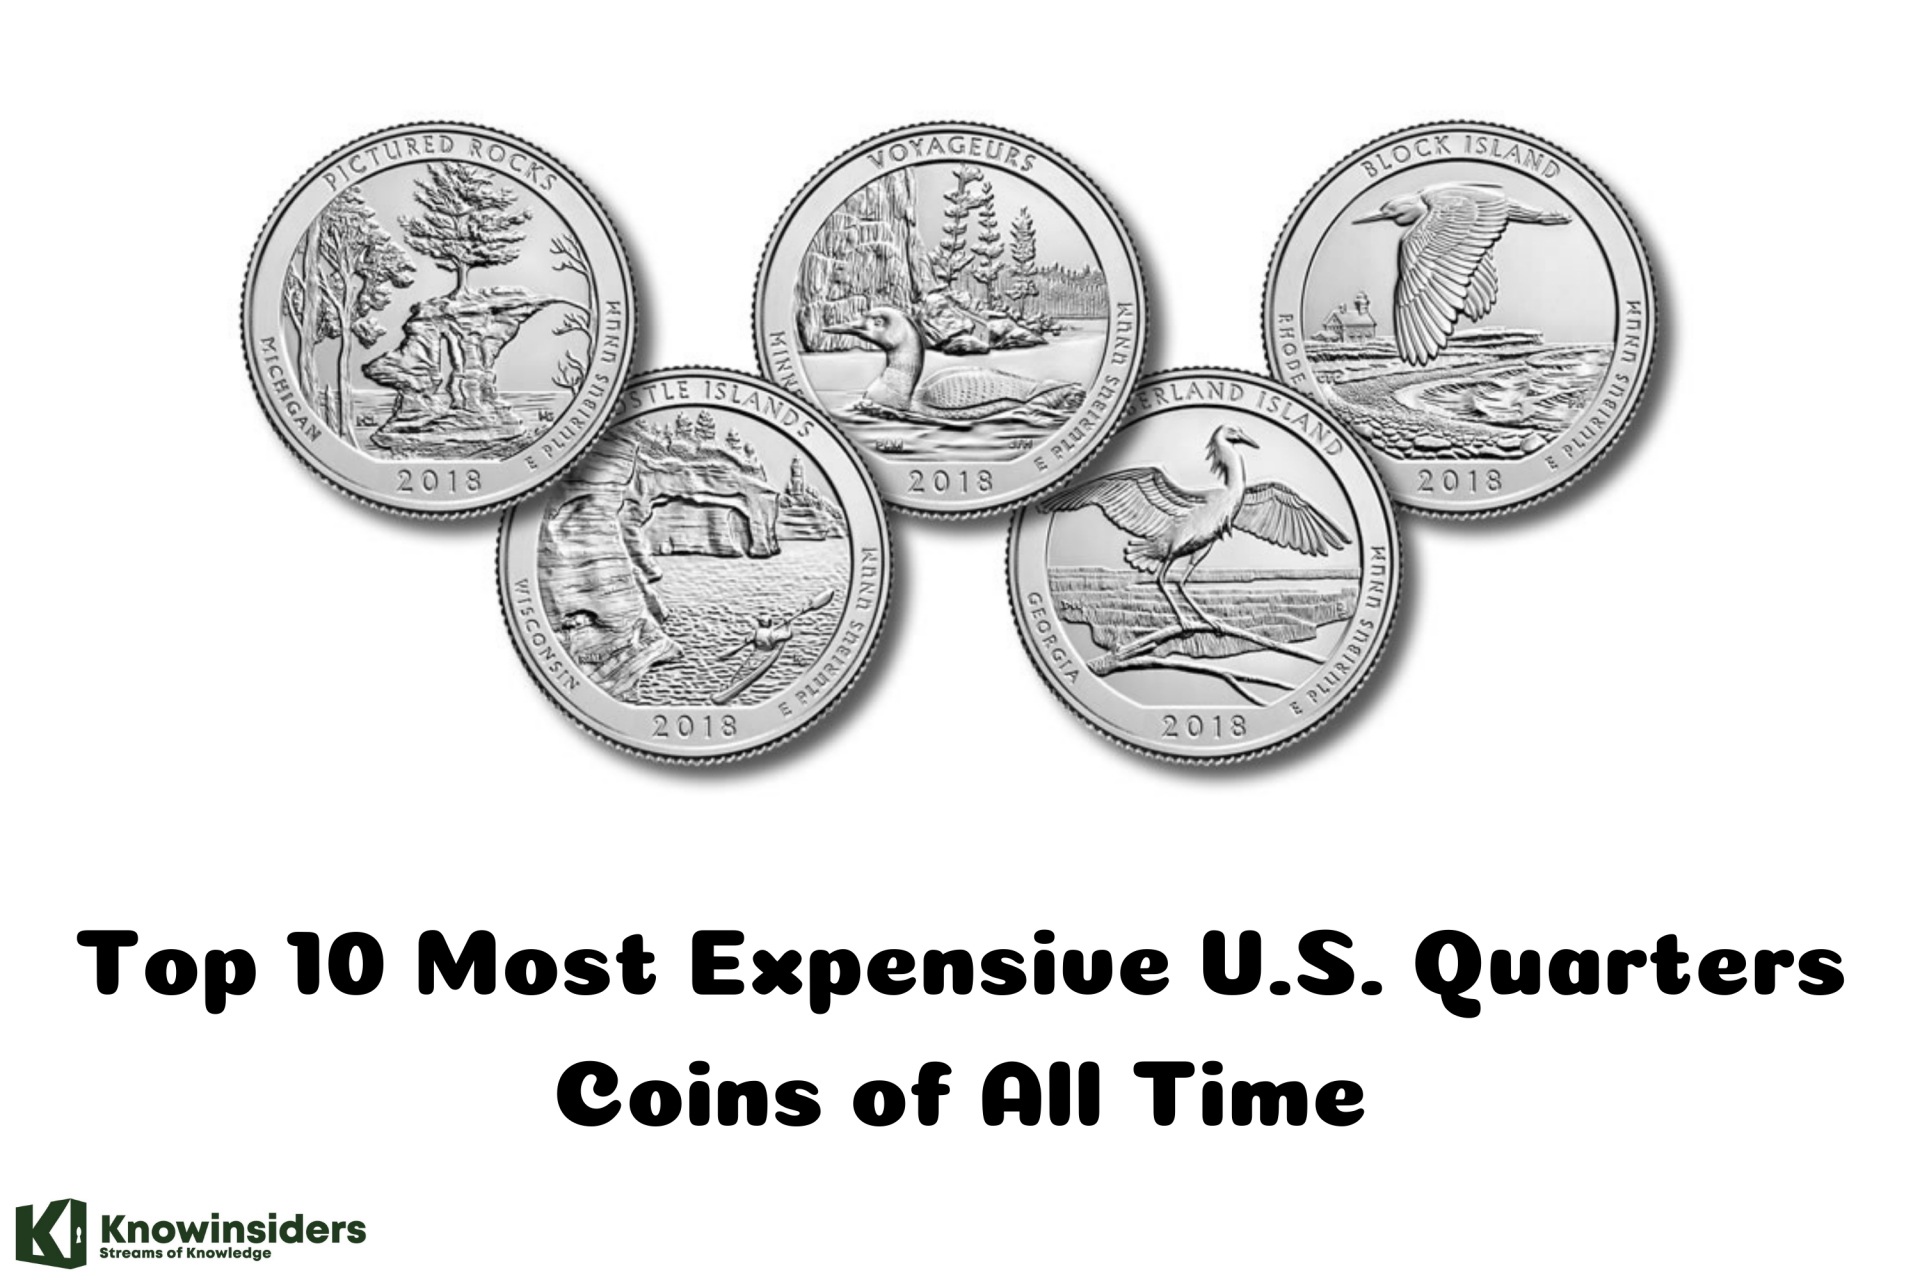 Top 10 Most Expensive U.S. Quarters Coins of All Time